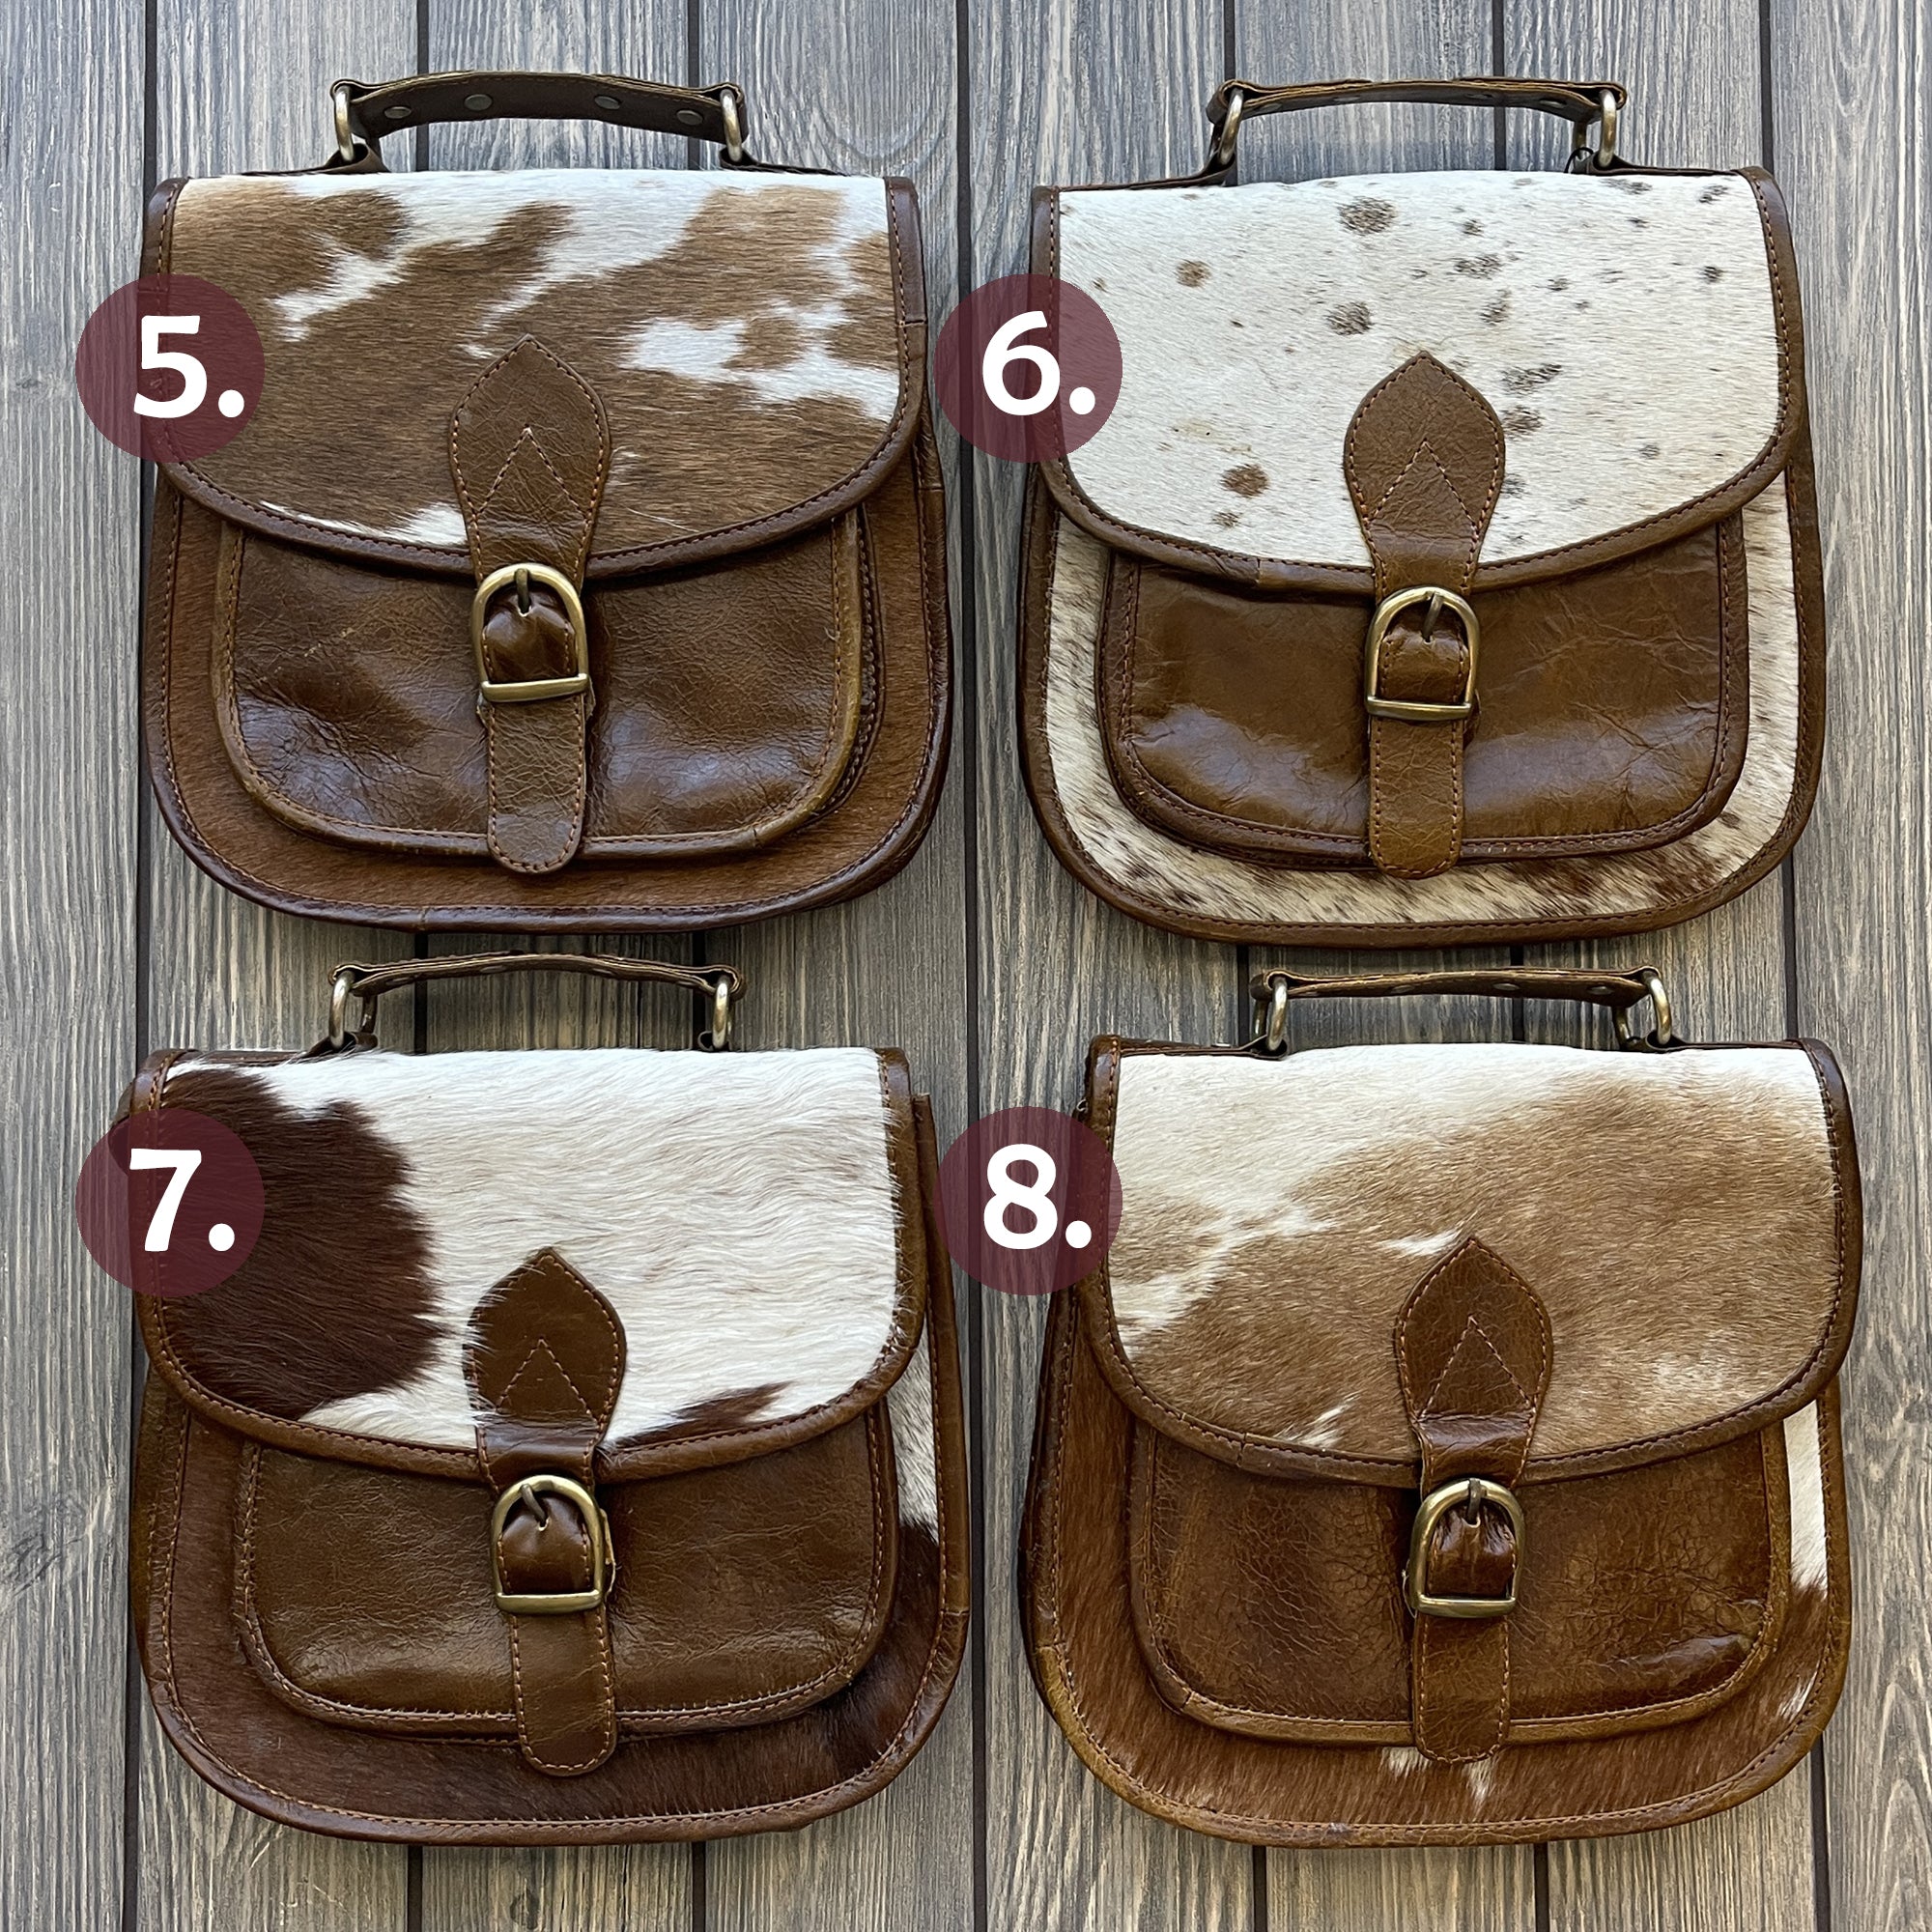 Sioux Tribe Cowhide Crossbody Messenger Purse